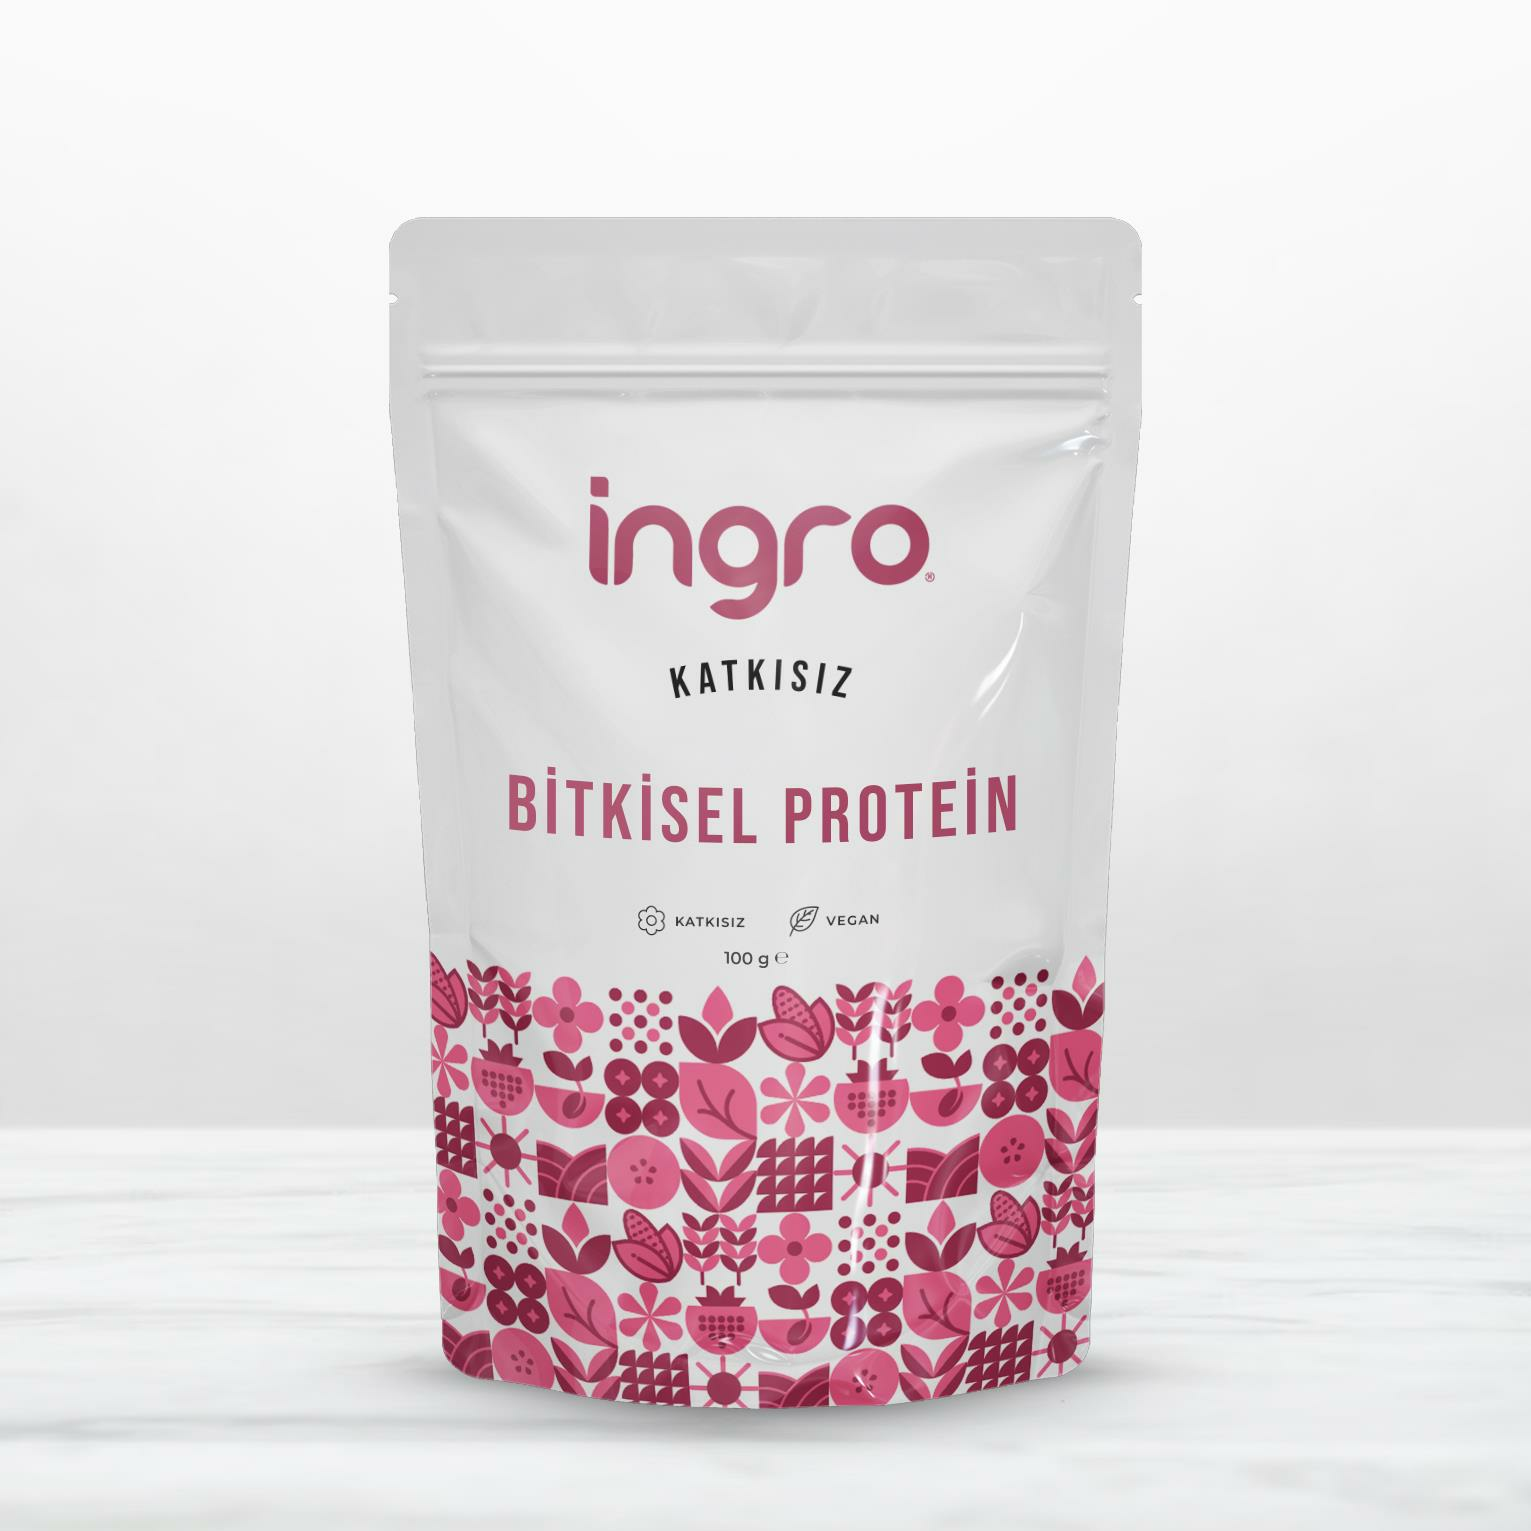 Bitkisel Protein 100 g